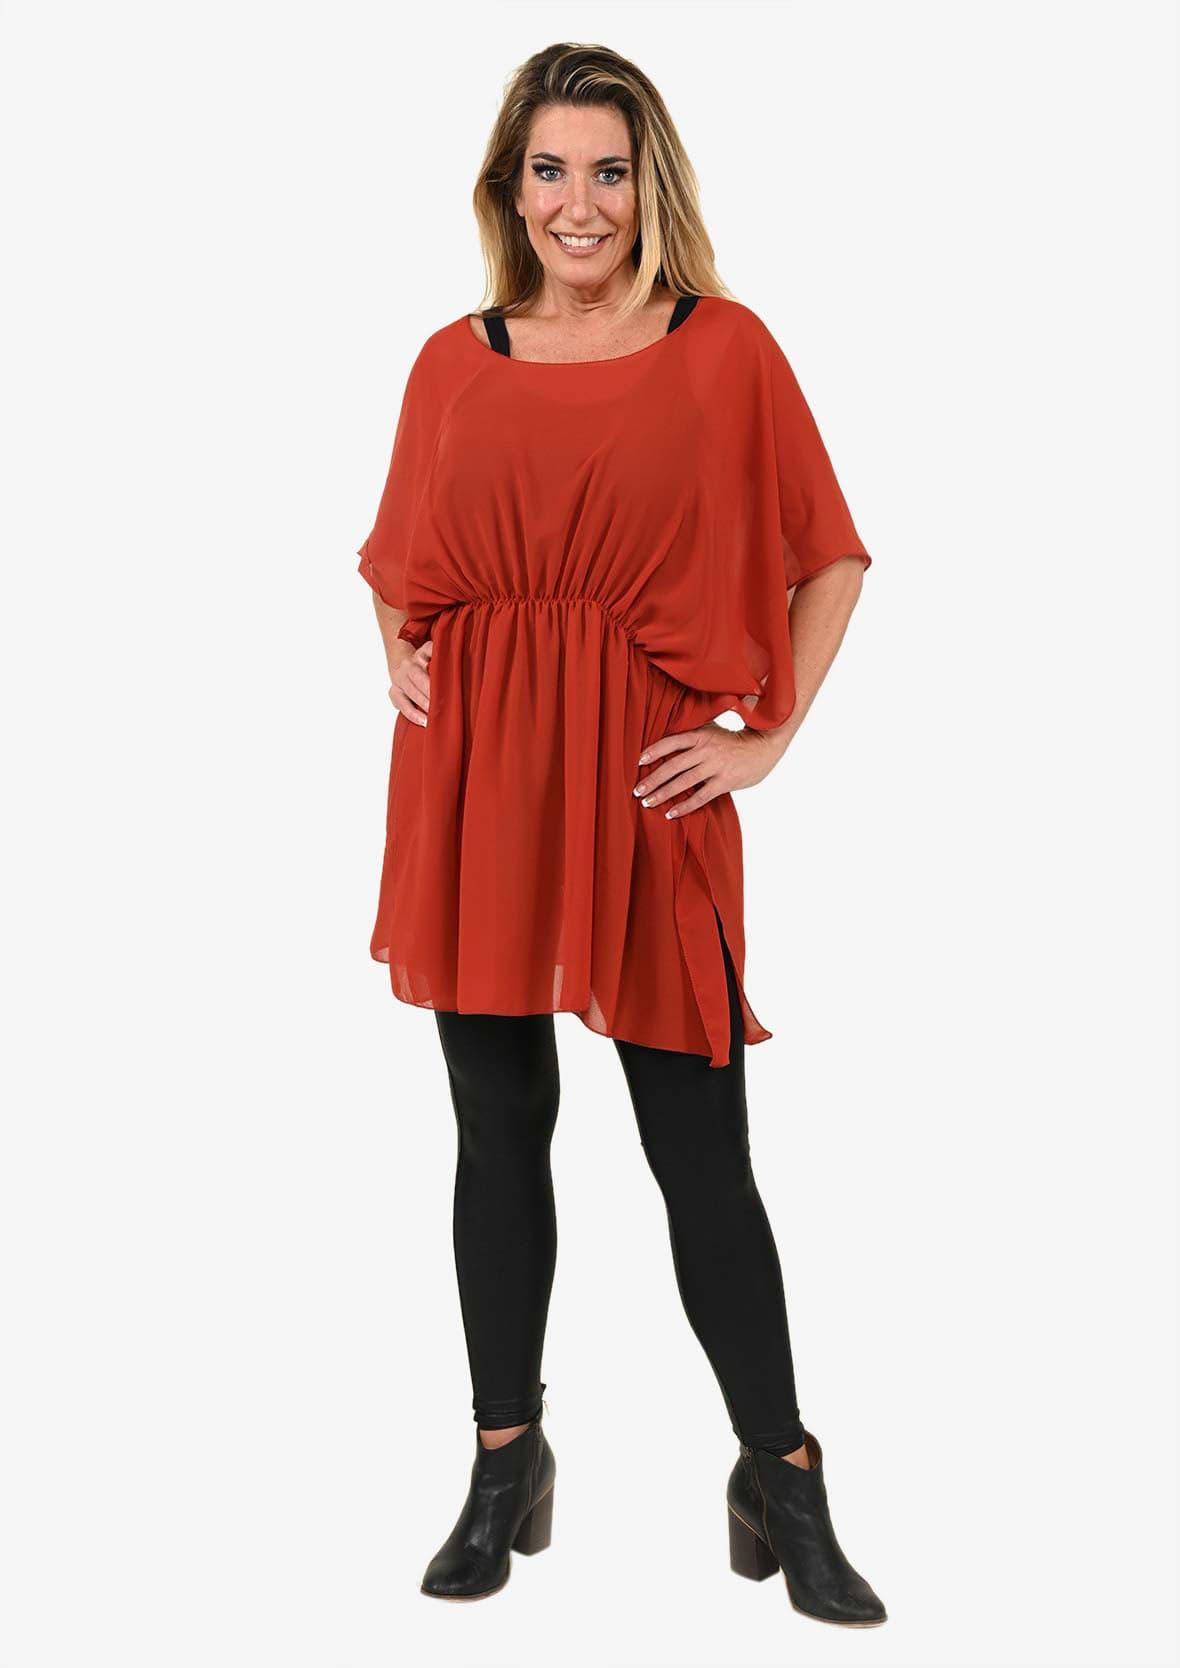 chiffon drape red top with gathered waist #color_Burgundy red